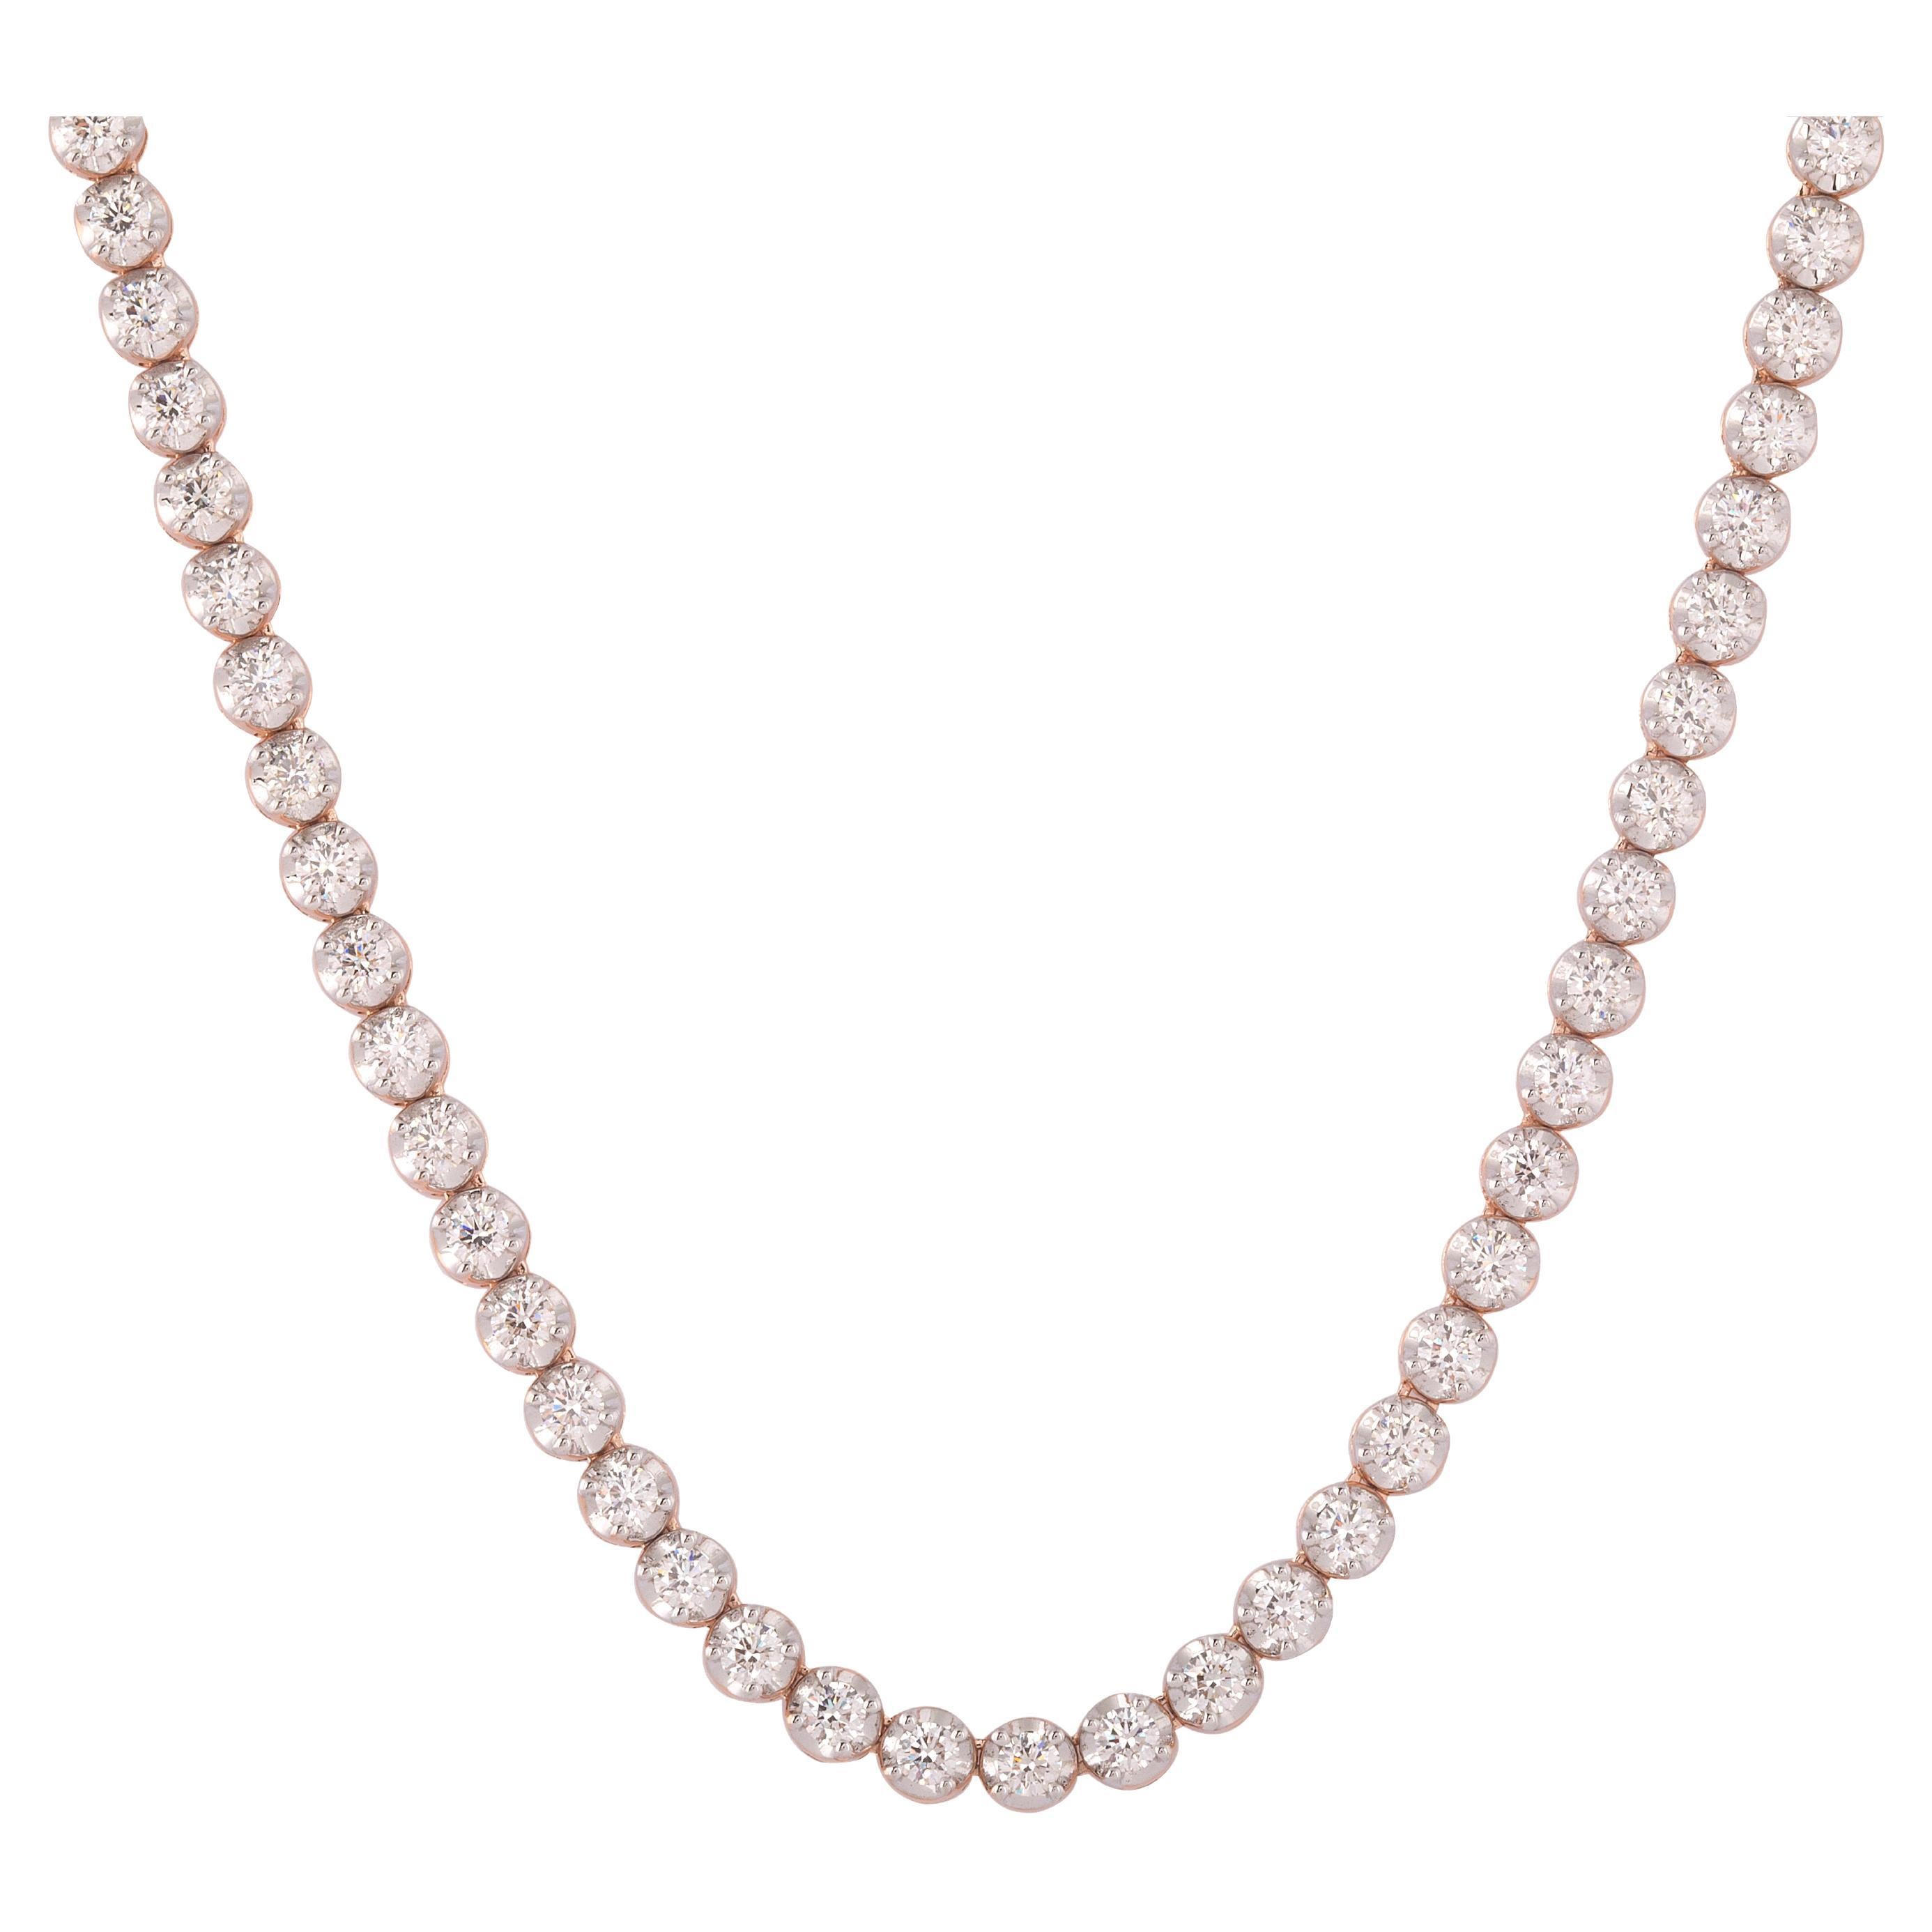 GSI Certified 18K Rose Gold 3.7ct Natural Diamond F-VVS Wedding Tennis Necklace For Sale